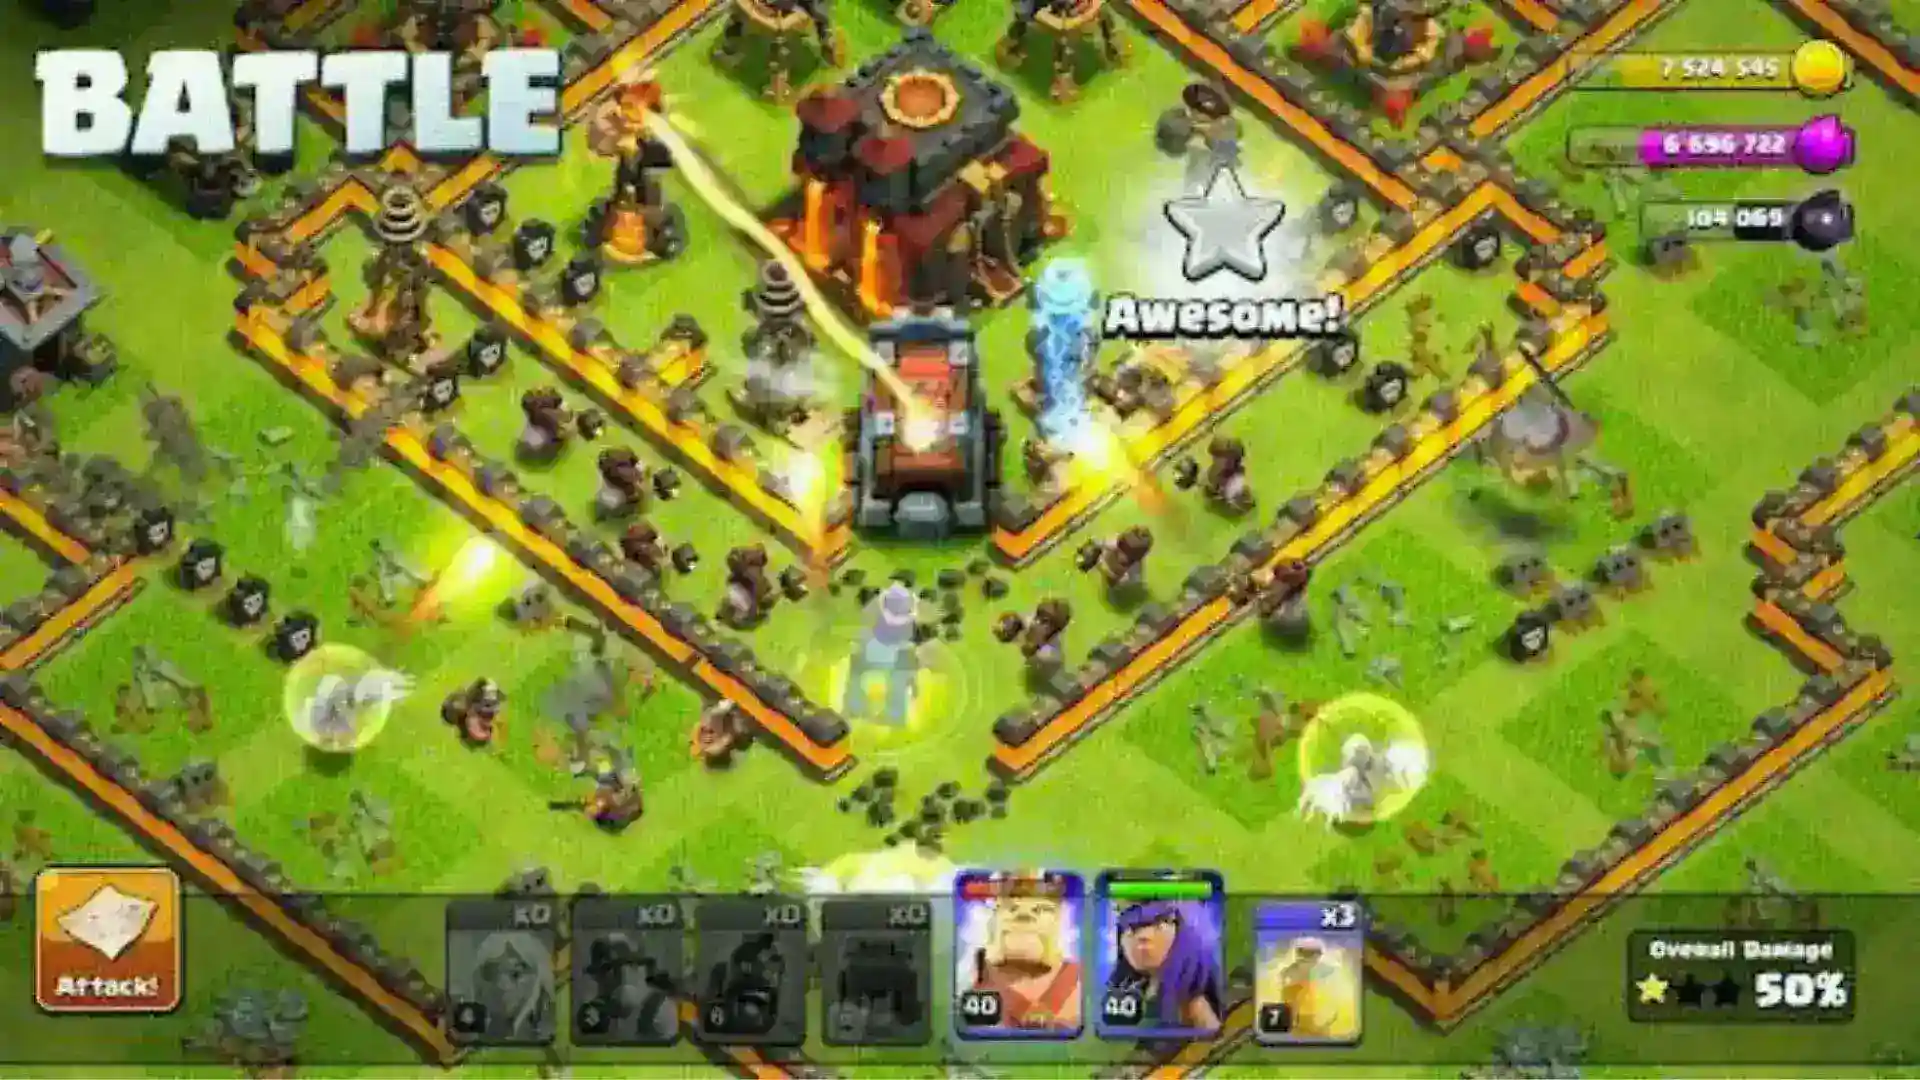 Battle in Clash of Clans